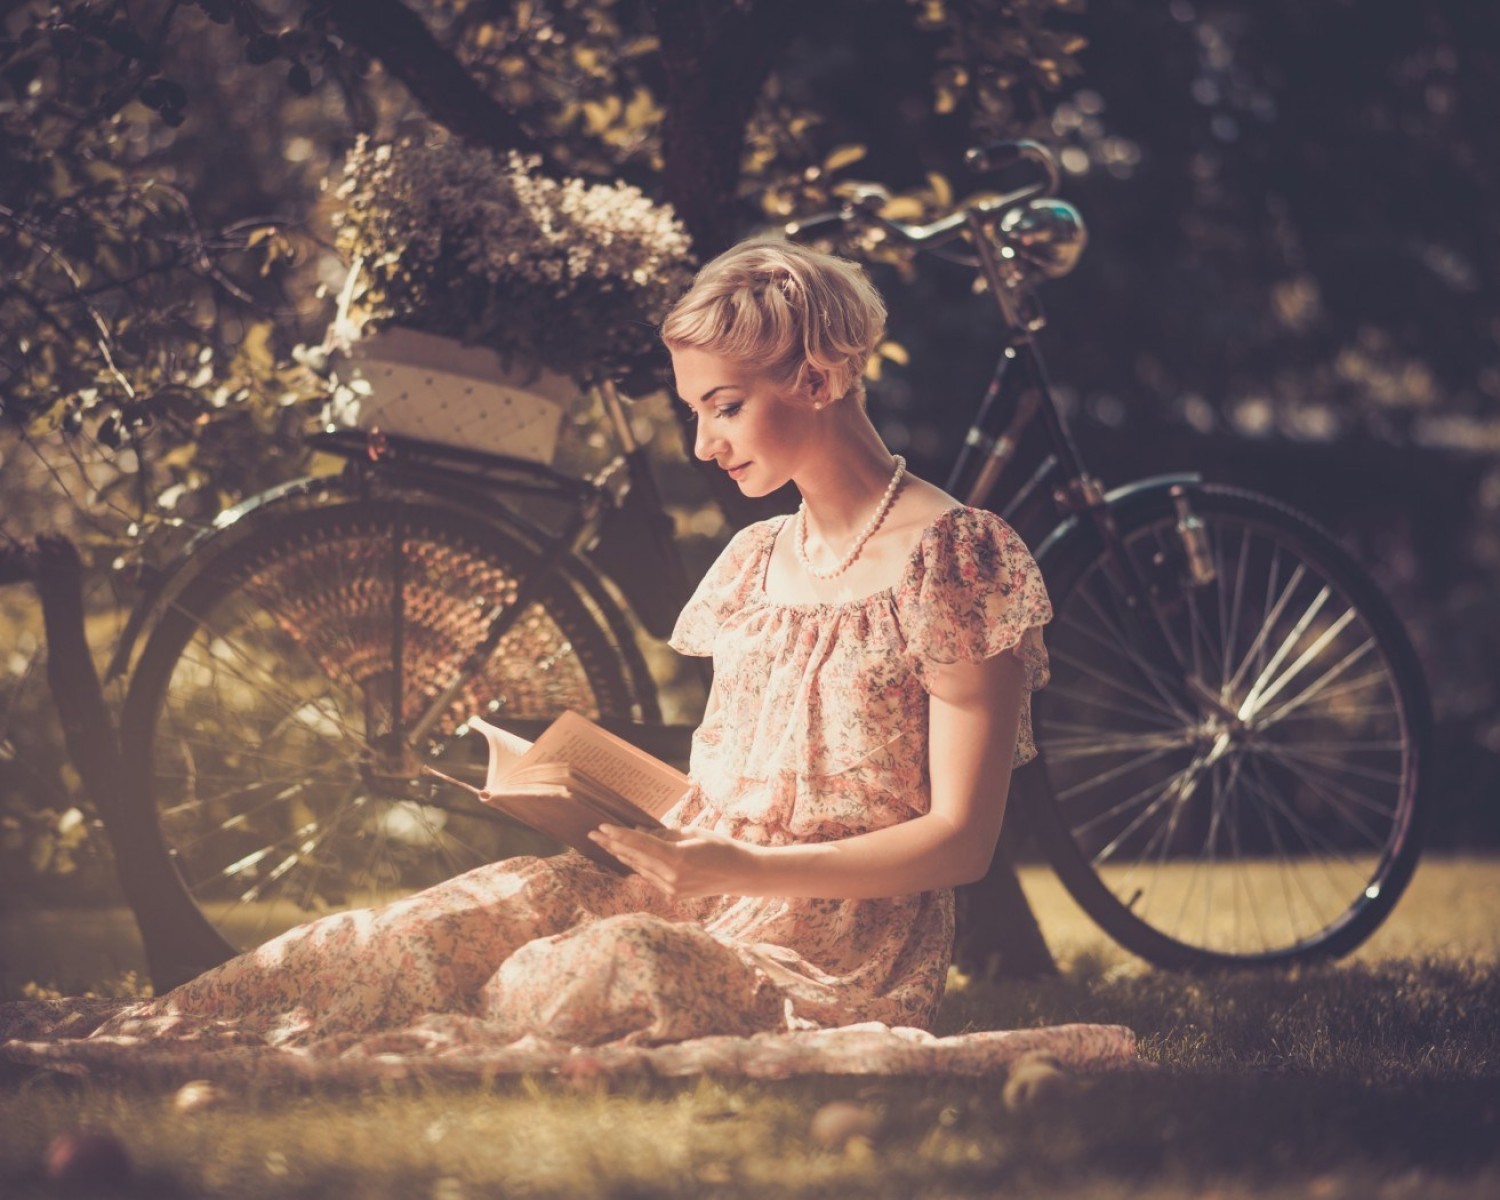 Vintage Women Blonde Bicycle Women Outdoors Reading Books Pearls 1500x1200